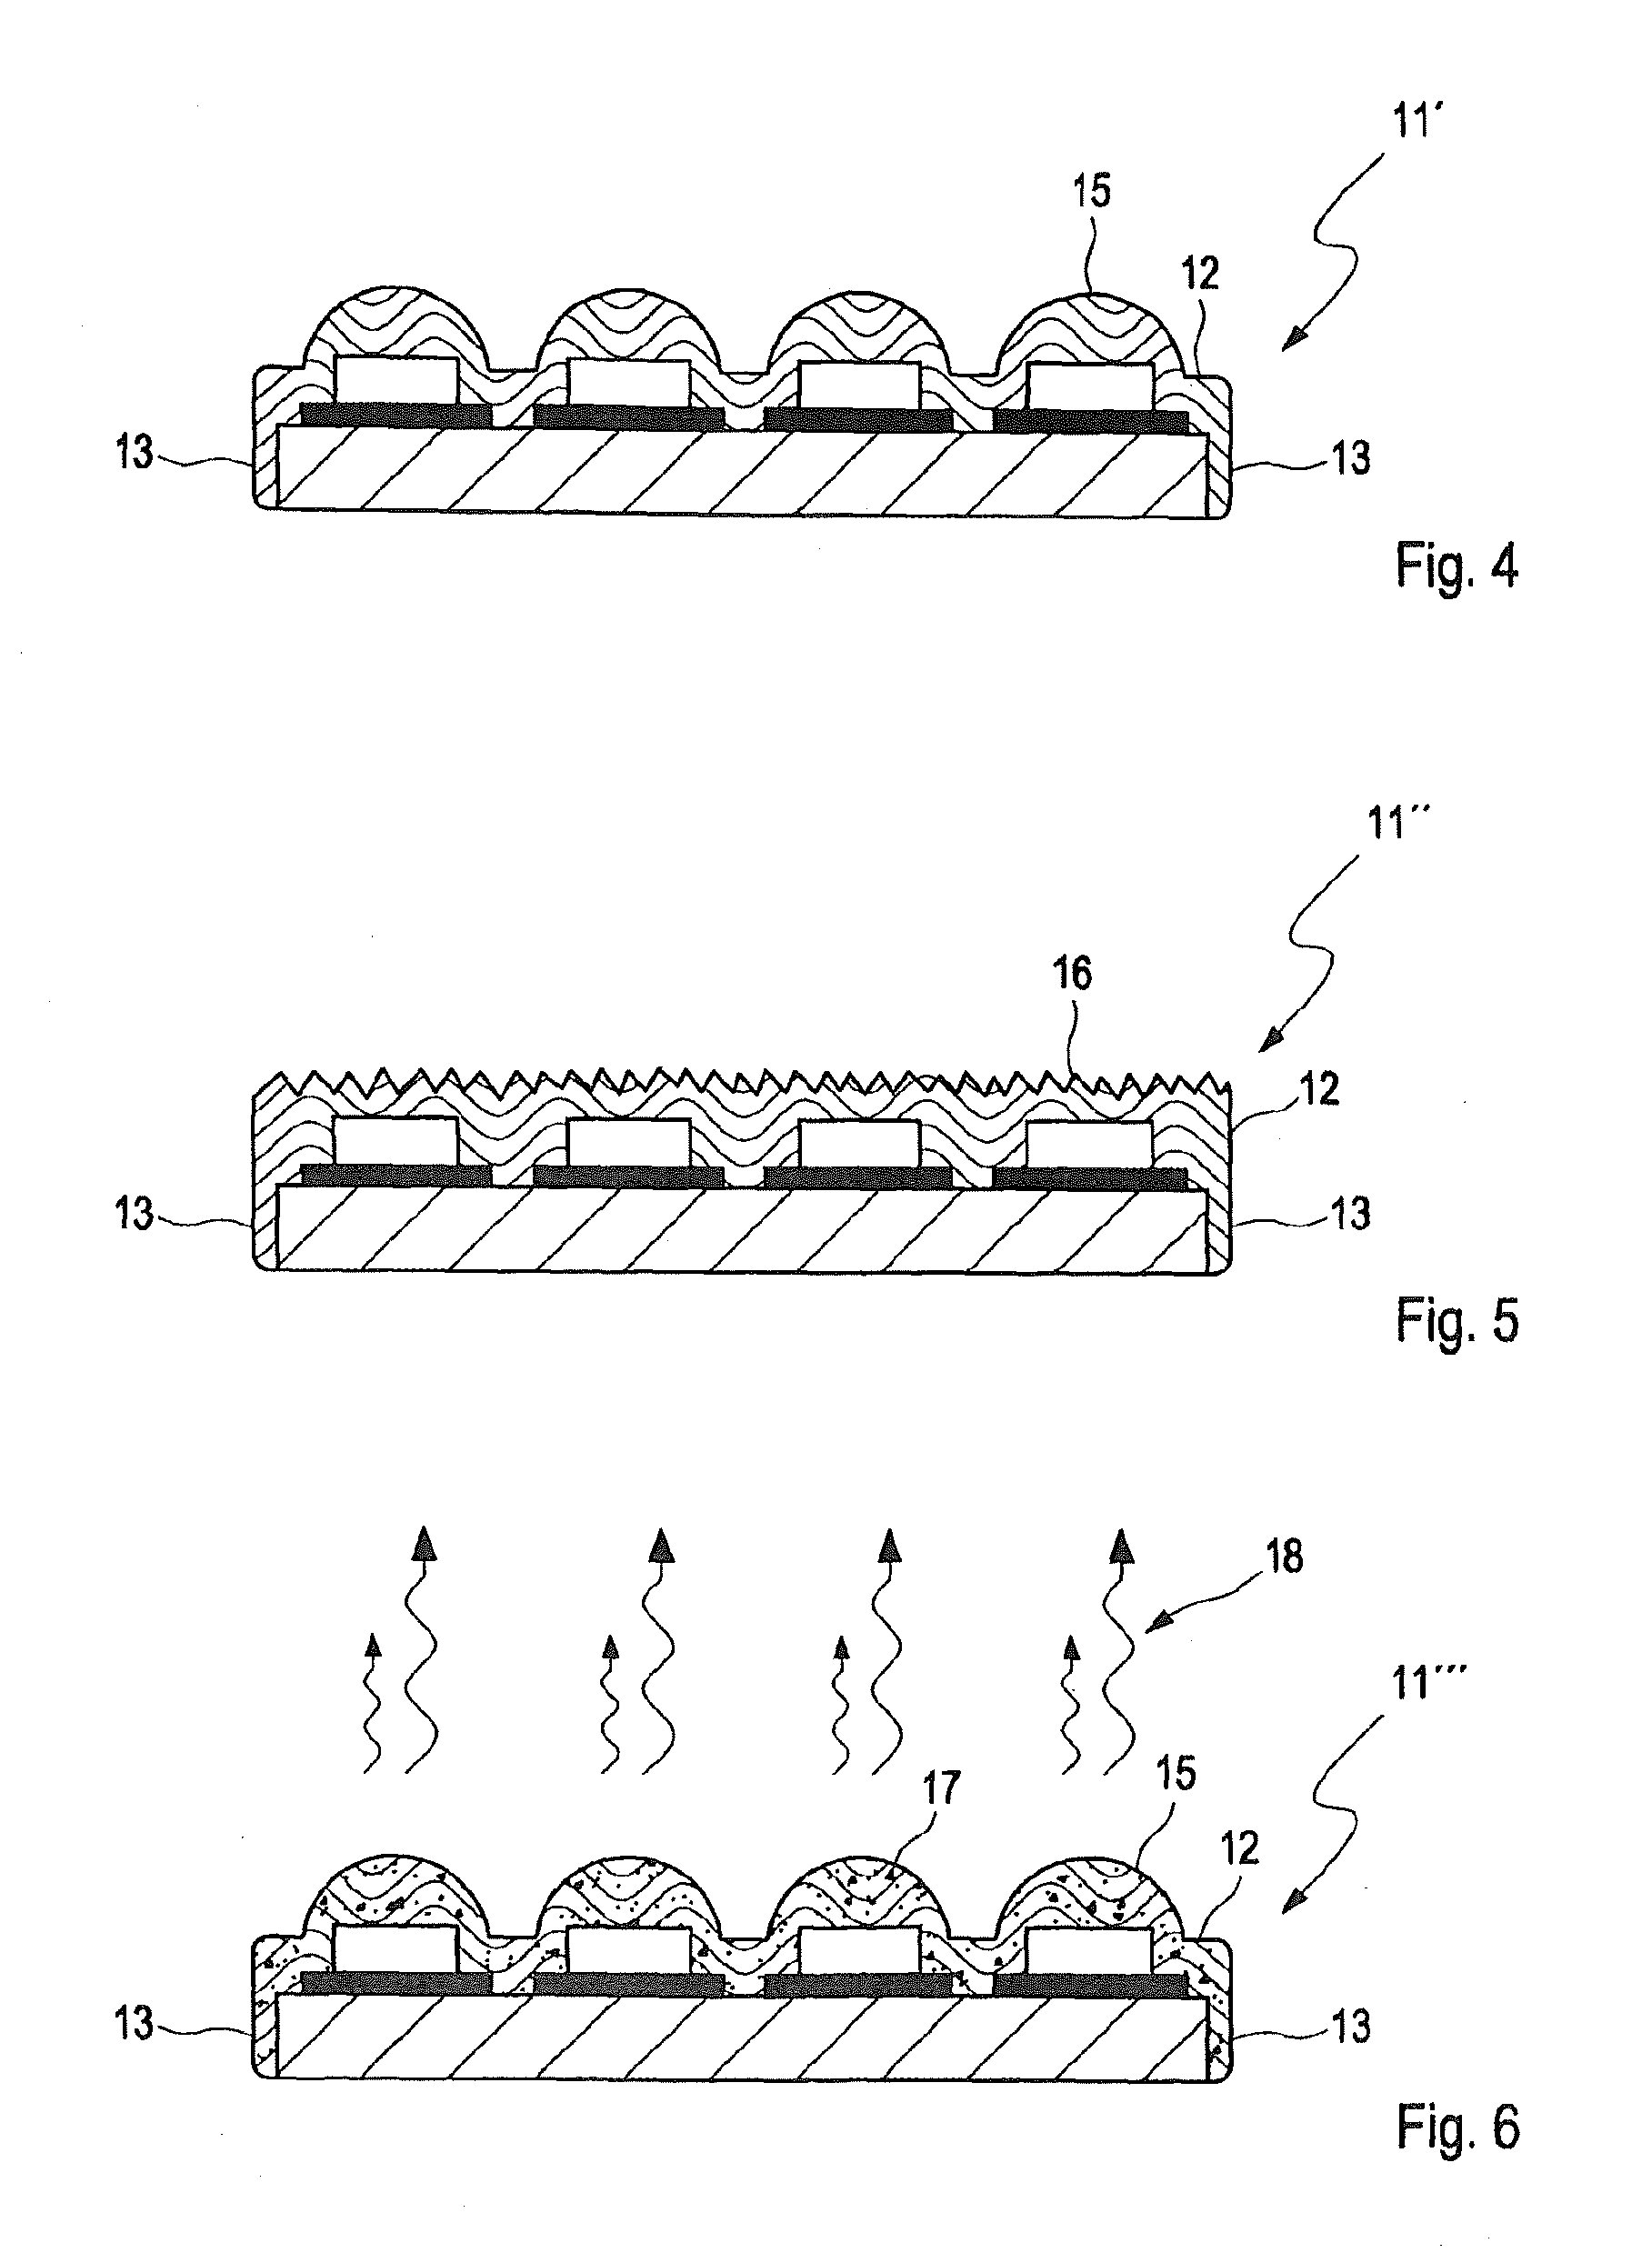 Coating Method for an Optoelectronic Chip-on-Board Module